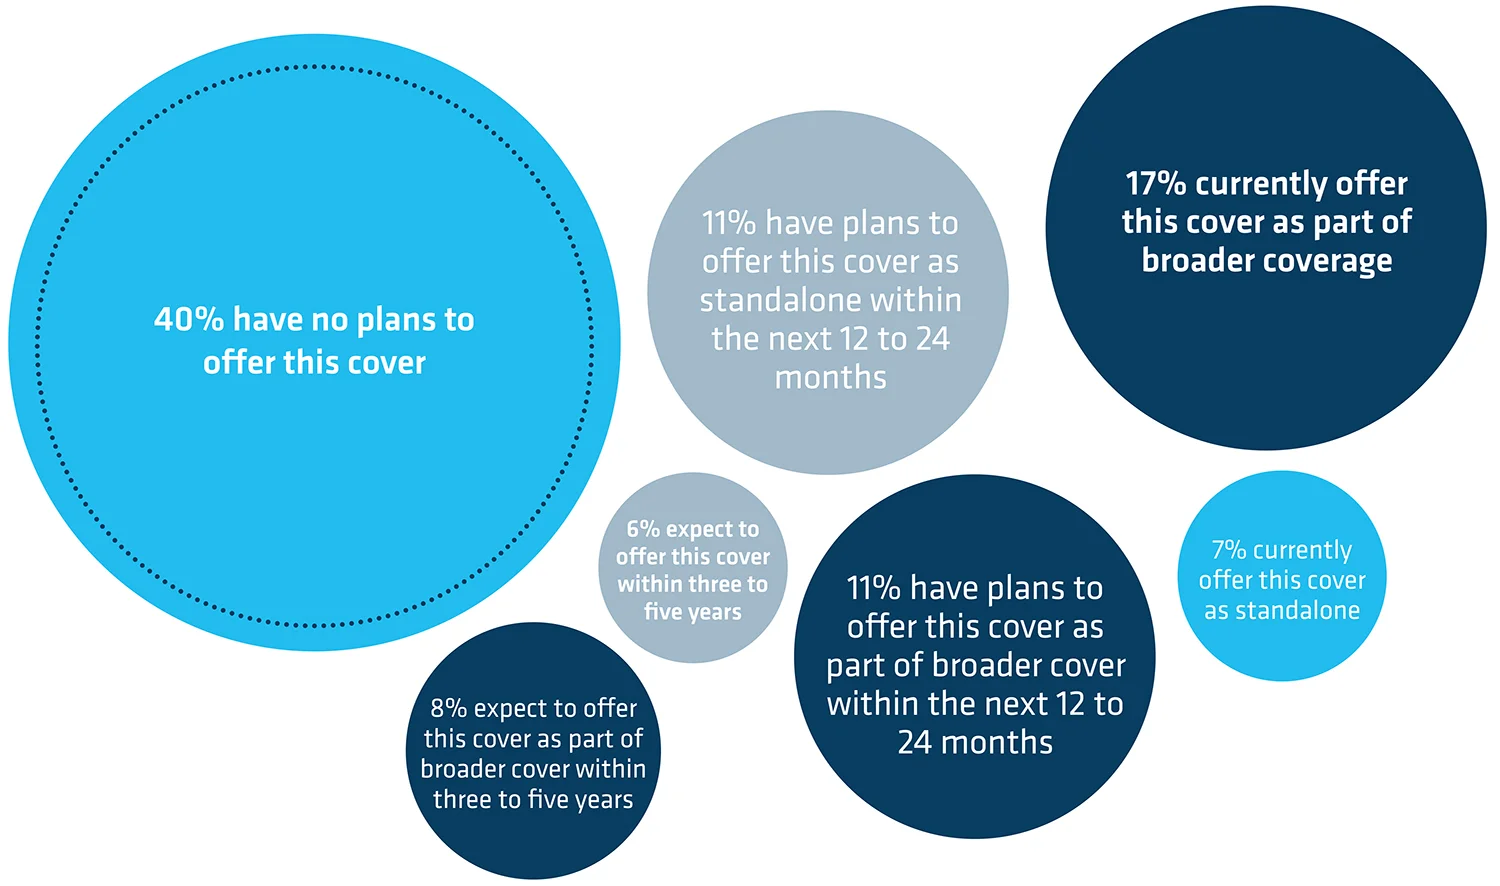 12 INSURERS WERE ASKED ABOUT THEIR PLANS TO OFFER PERSONAL LINES CYBER COVER IN THE FUTURE